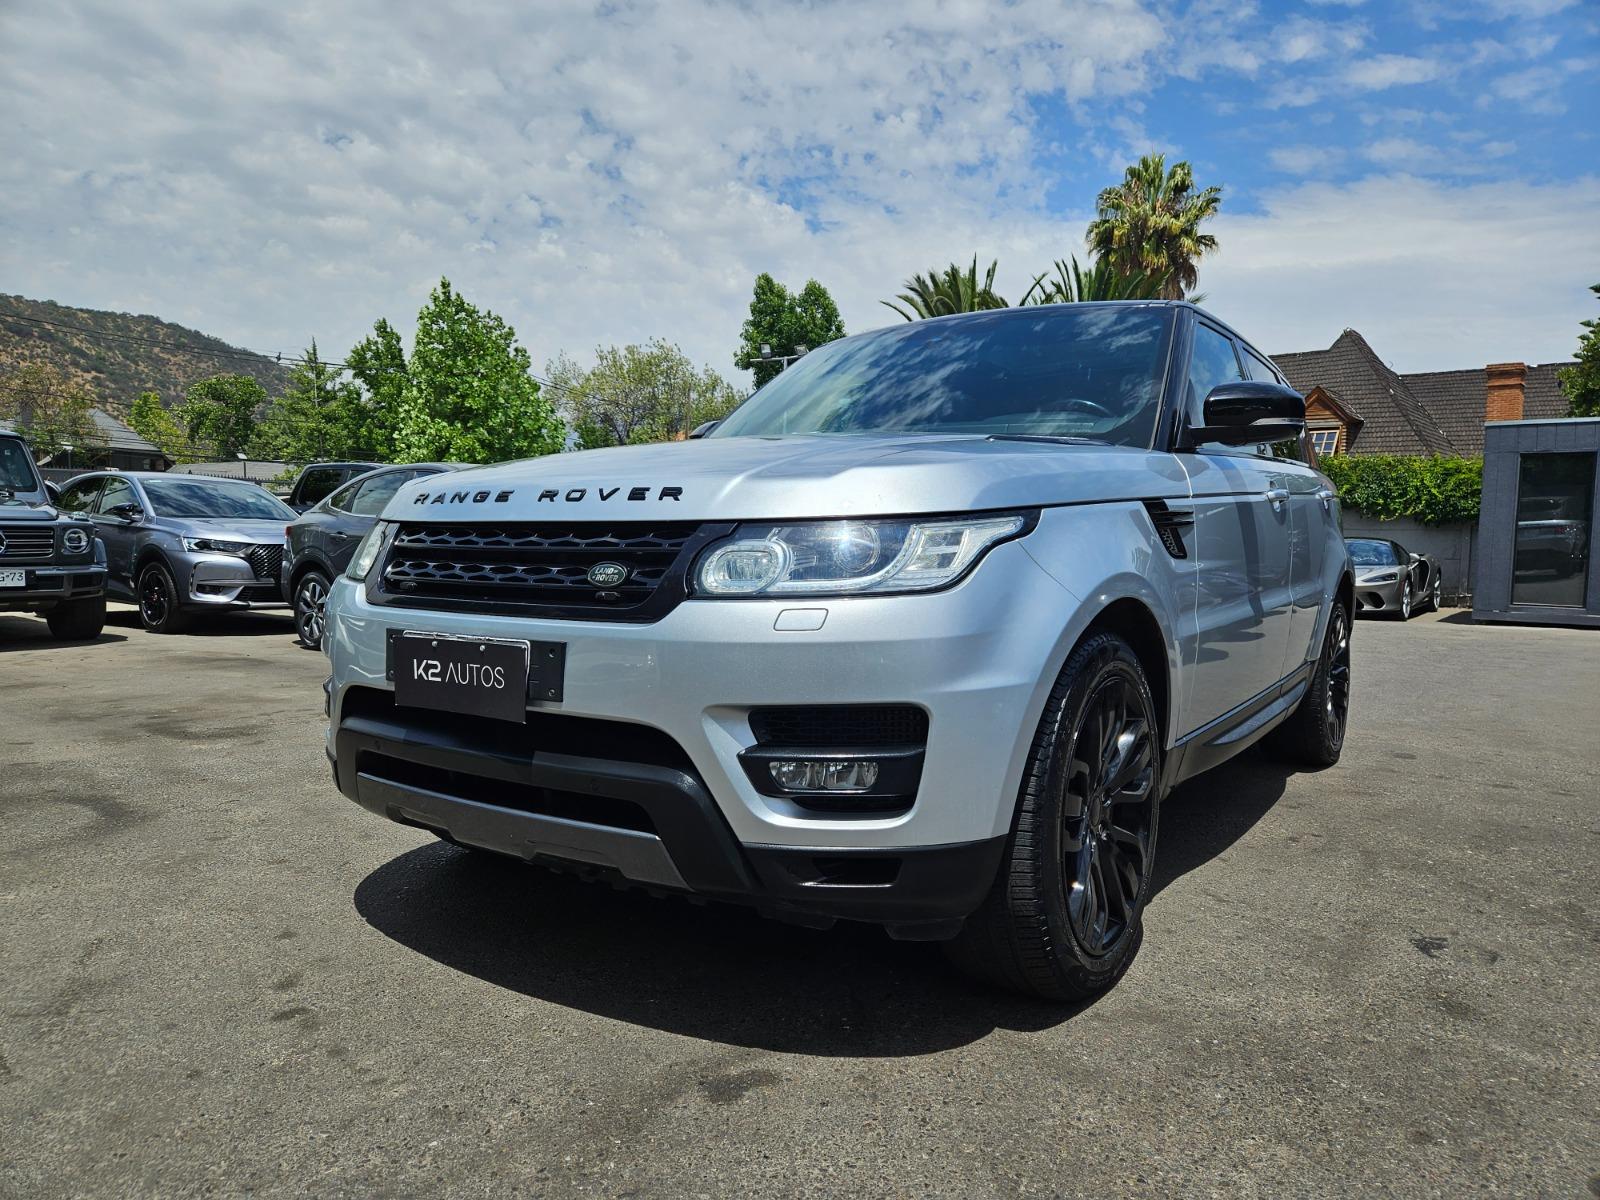 LAND ROVER RANGE ROVER HSE 4.4 V8 DIESEL 2017 FULL EQUIPO, IMPECABLE - 